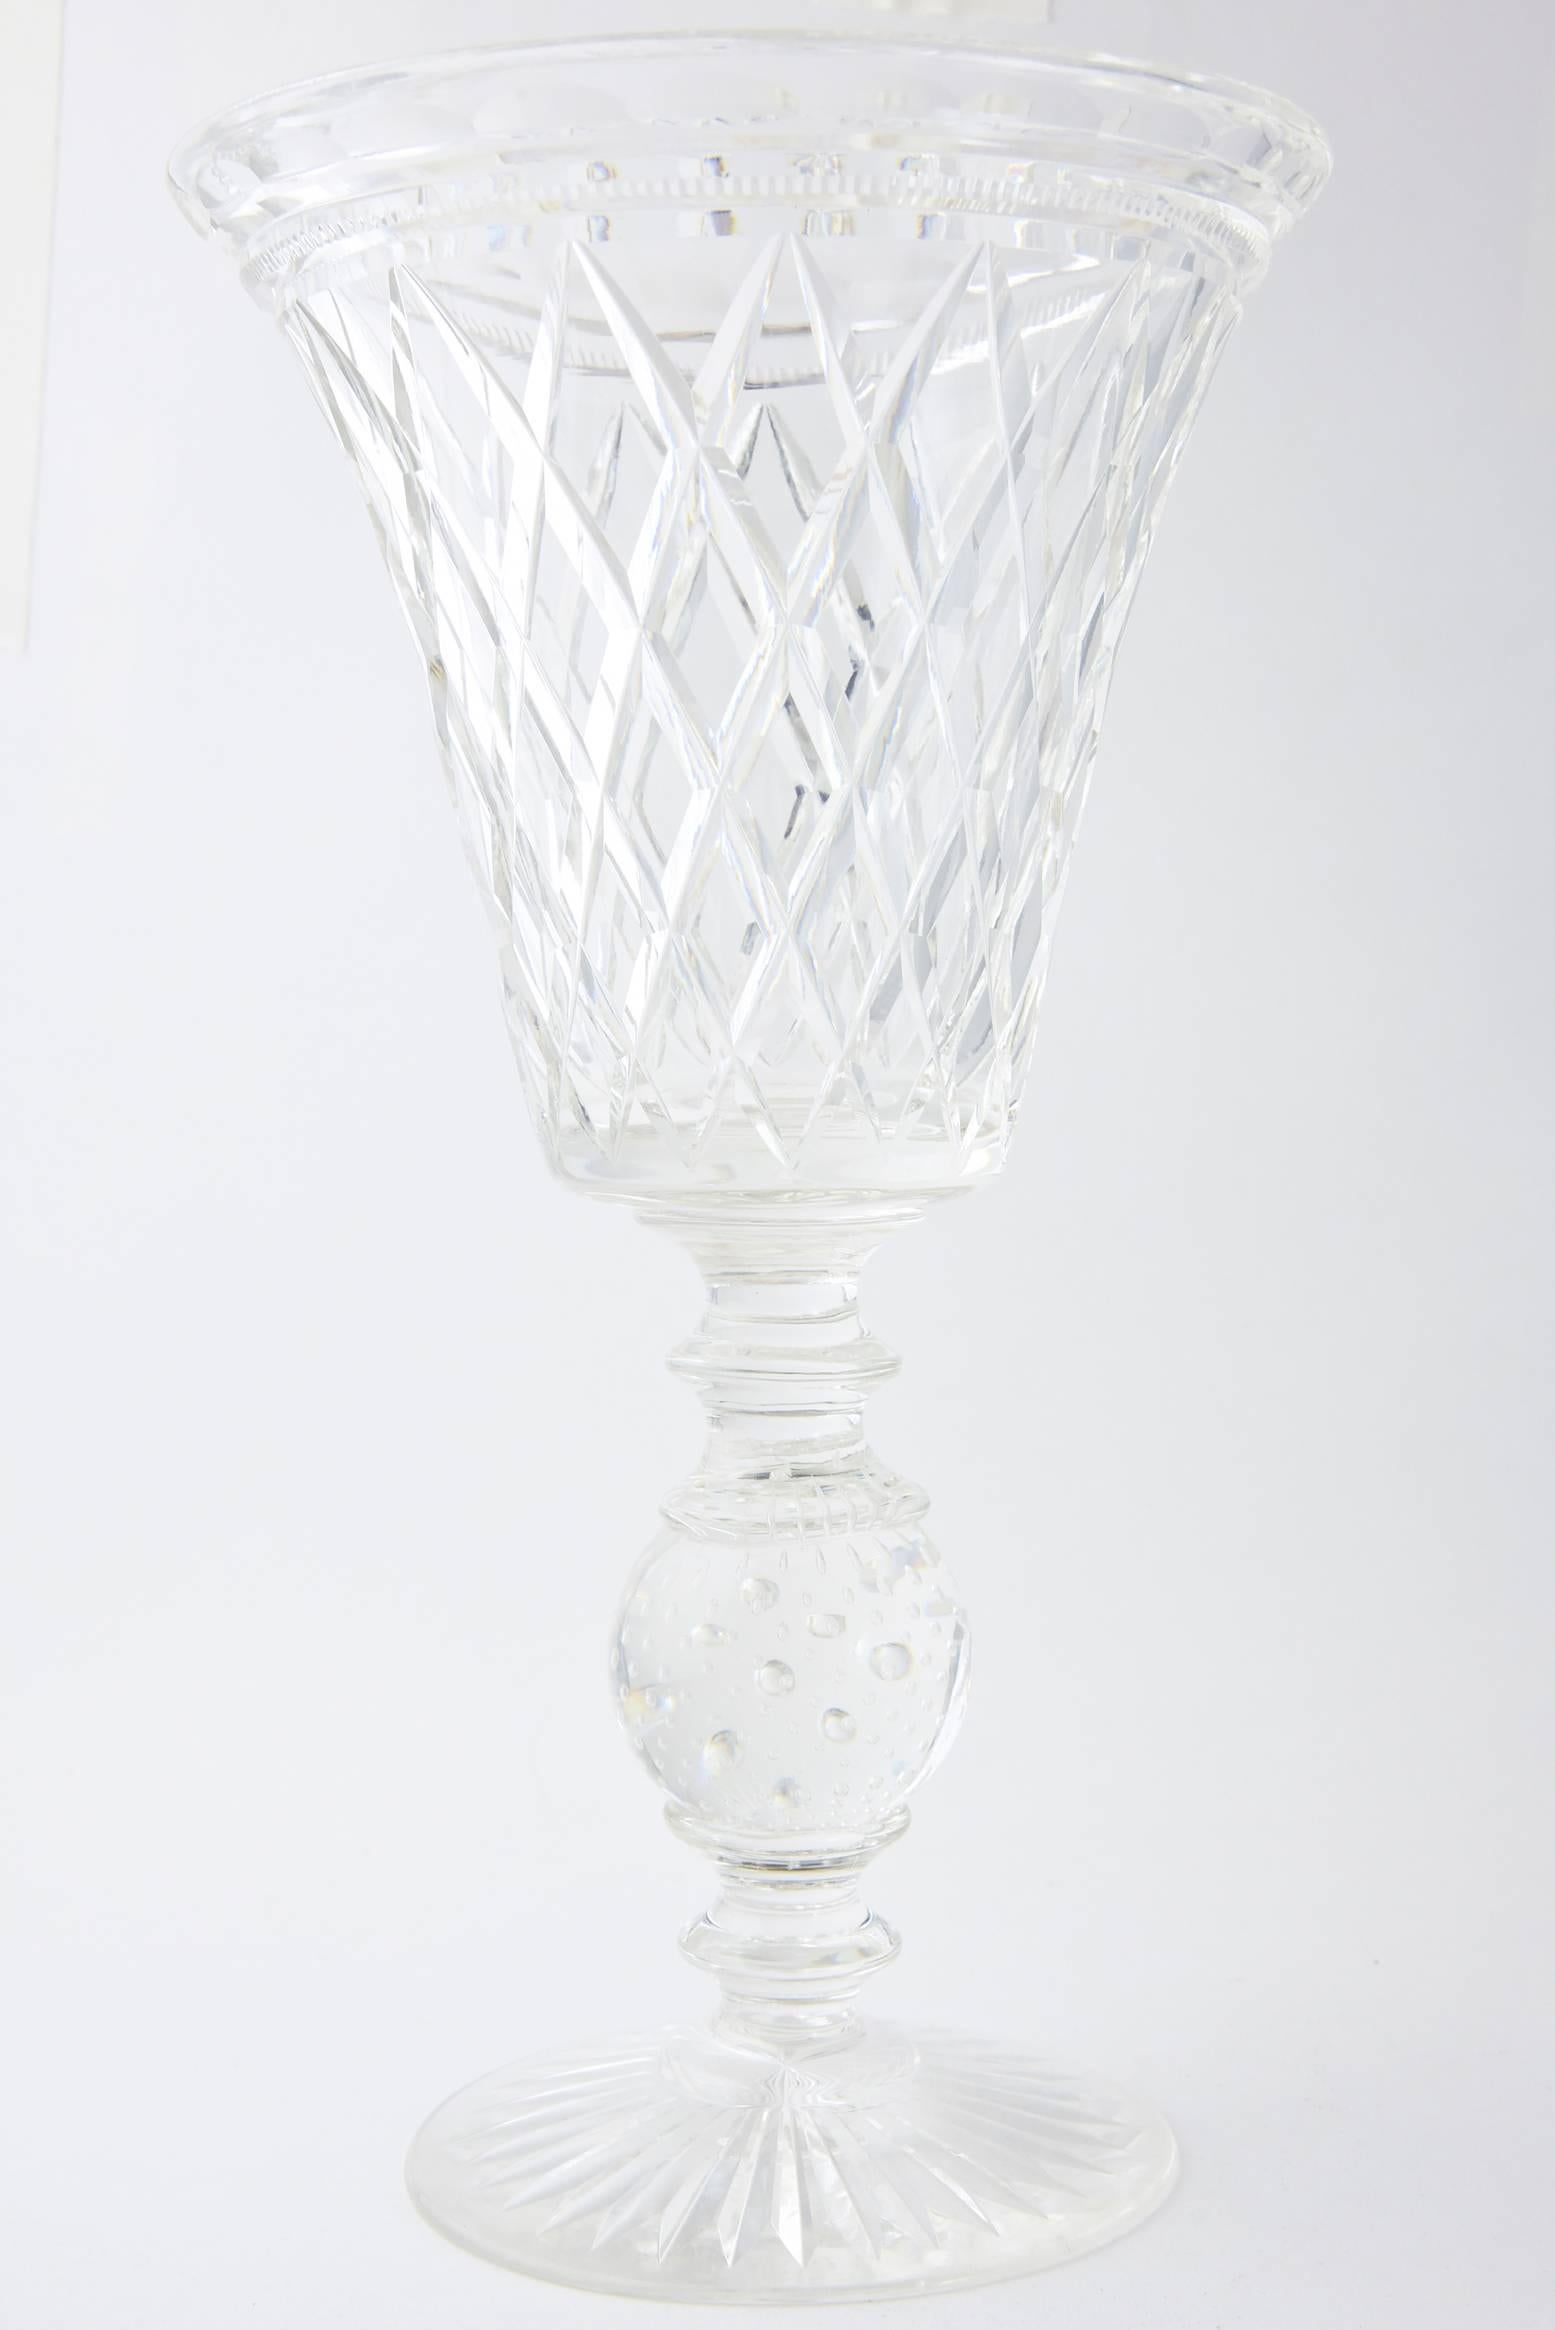 Large Mid 20th Century Chalice Shaped Cut-Glass Pairpoint Vase For Sale 2